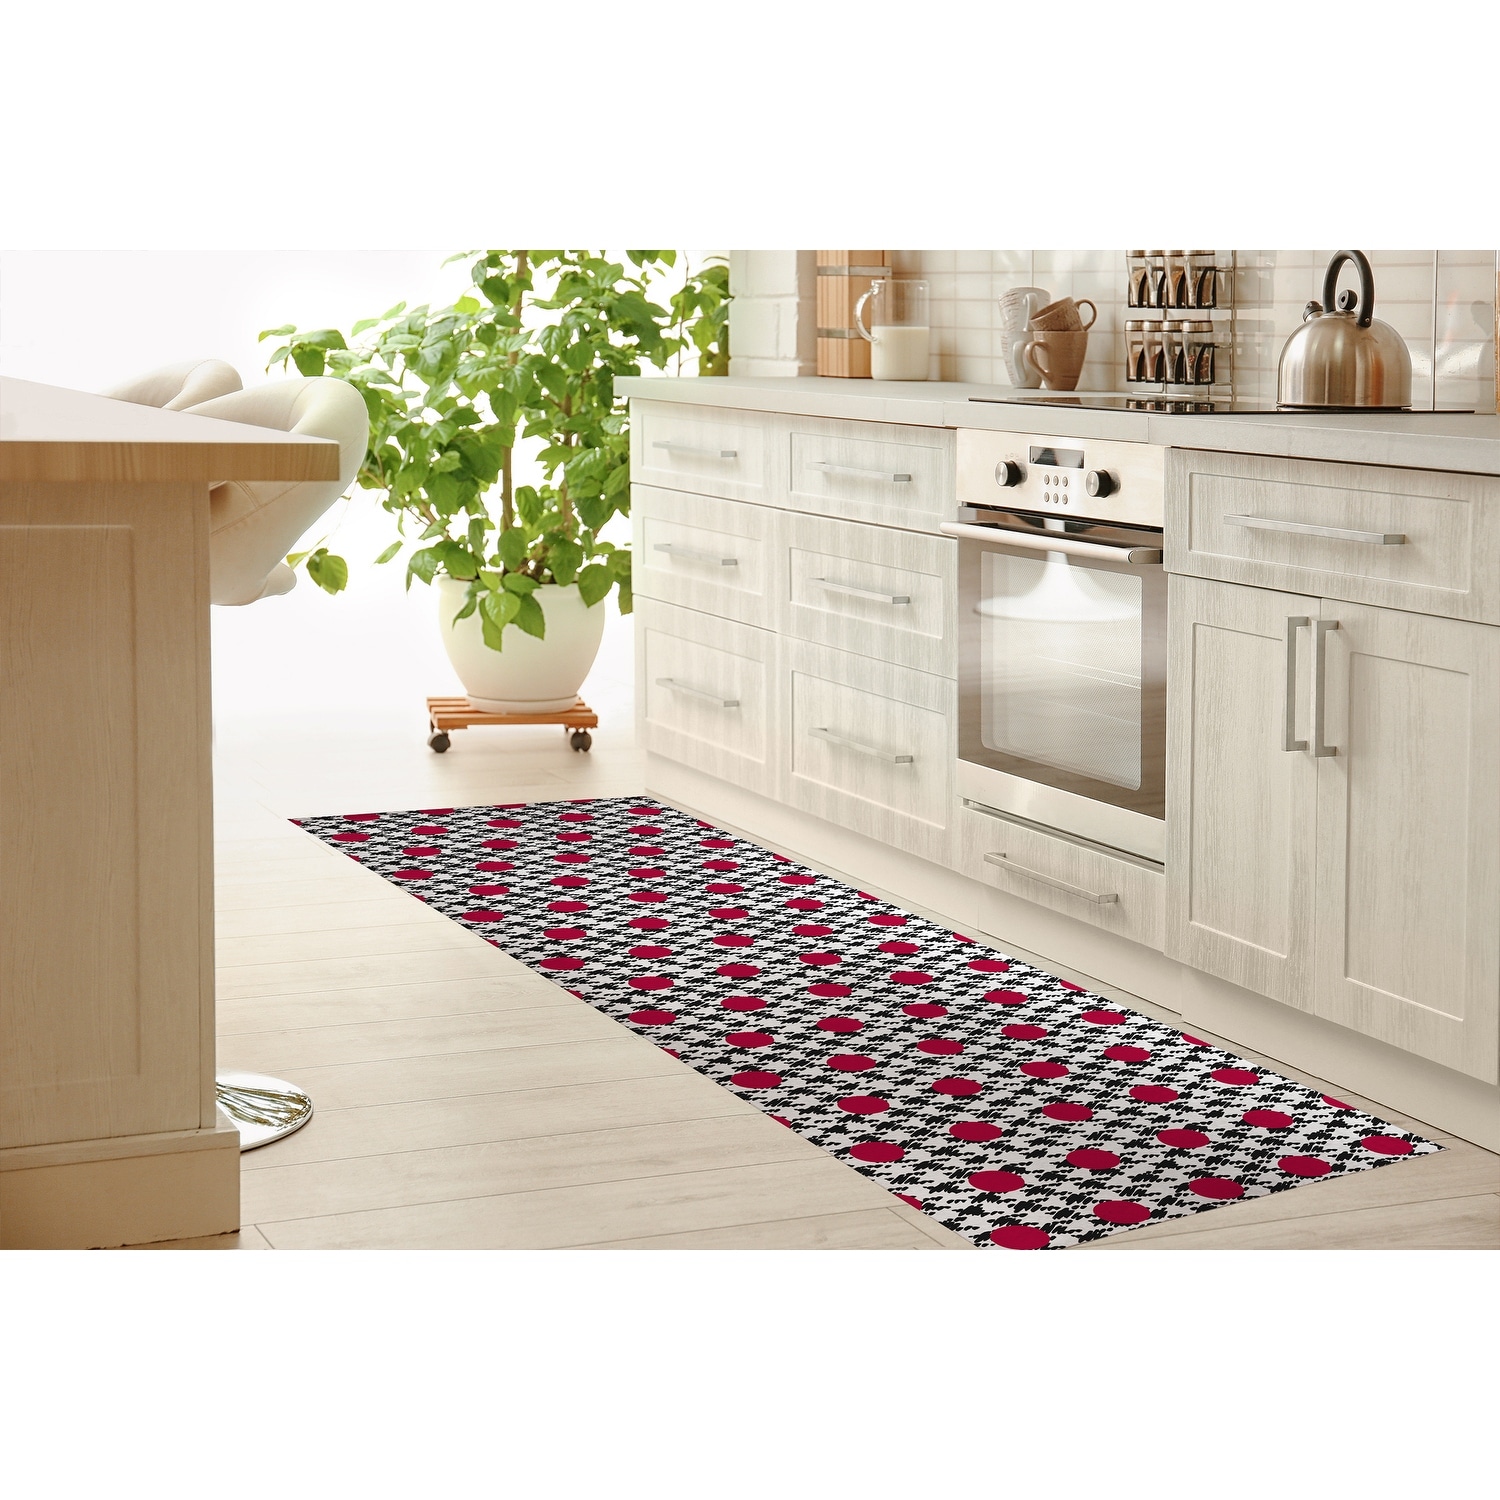 https://ak1.ostkcdn.com/images/products/is/images/direct/38e7d6556c3adc637723047ddbf4038c1e170159/HARRIS-BLACK-and-RED-Kitchen-Mat-by-Kavka-Designs.jpg